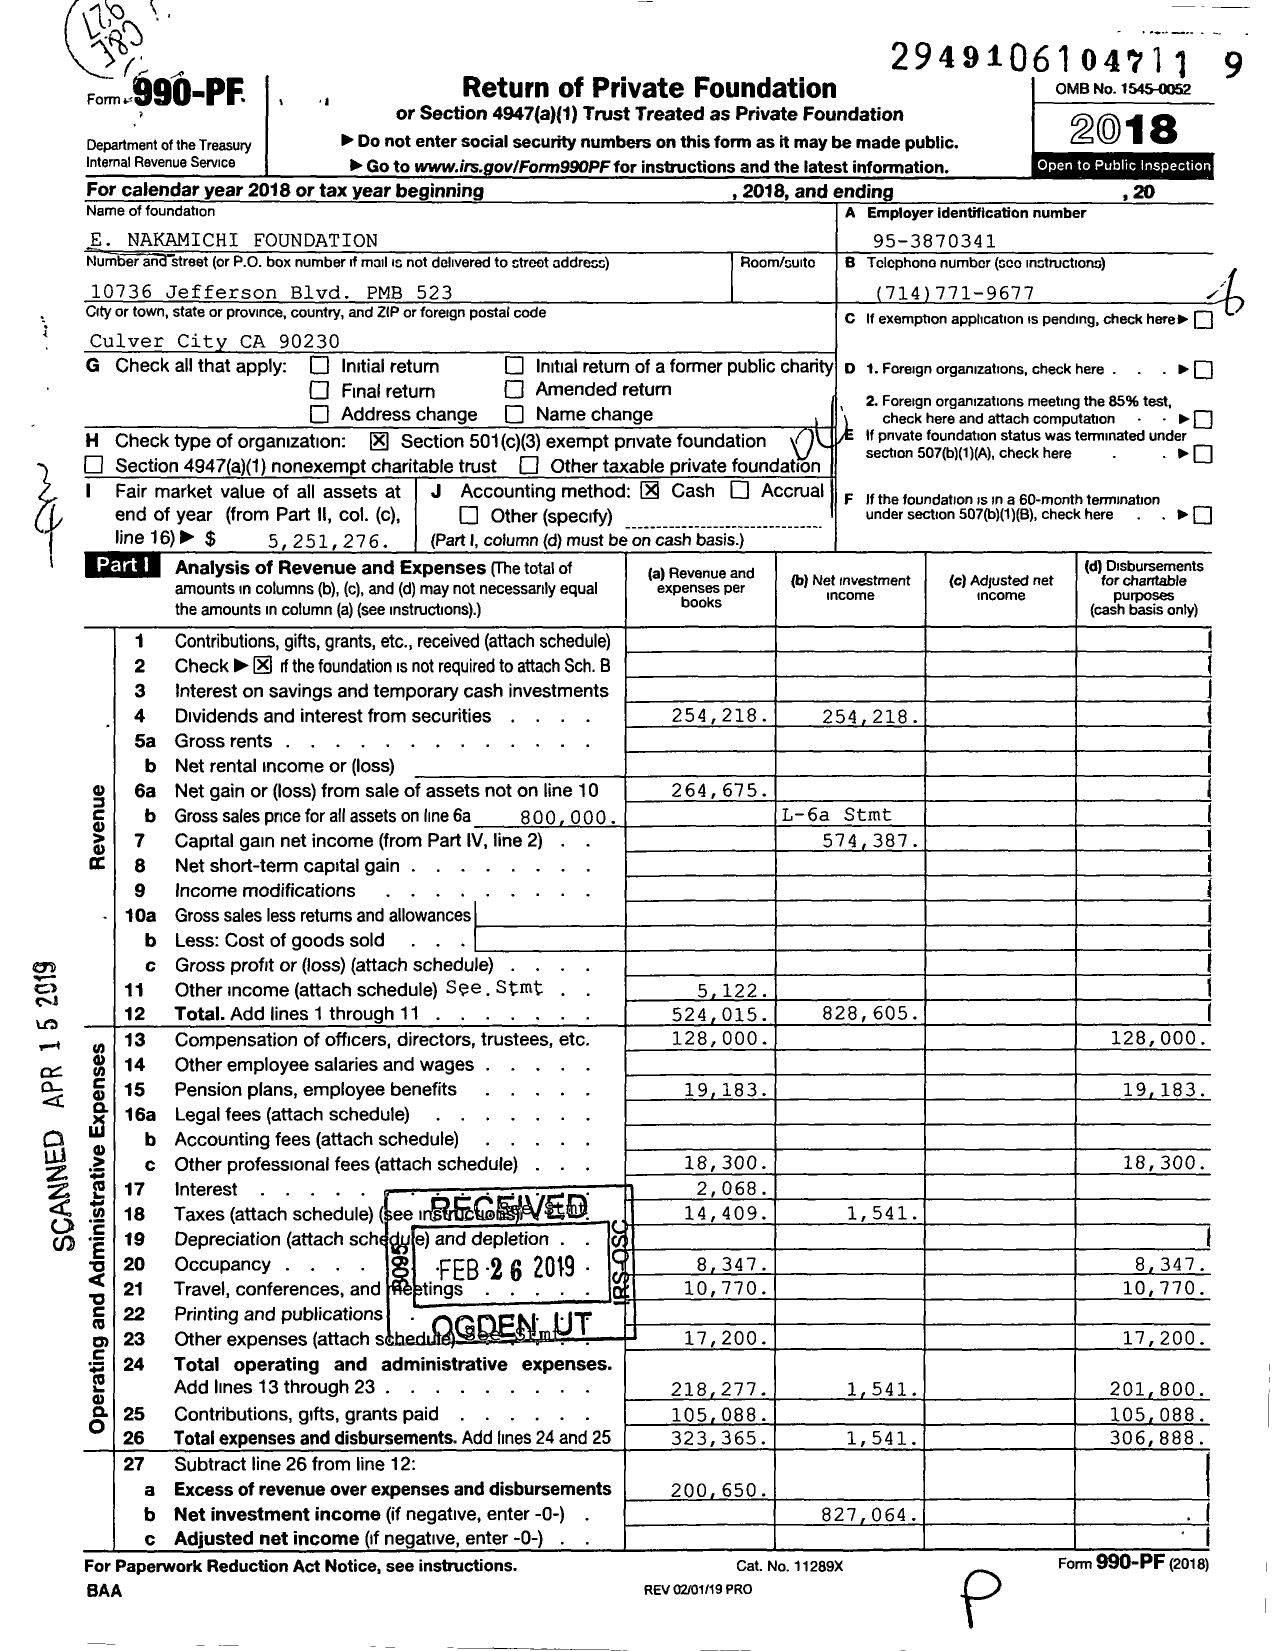 Image of first page of 2018 Form 990PF for E Nakamichi Foundation